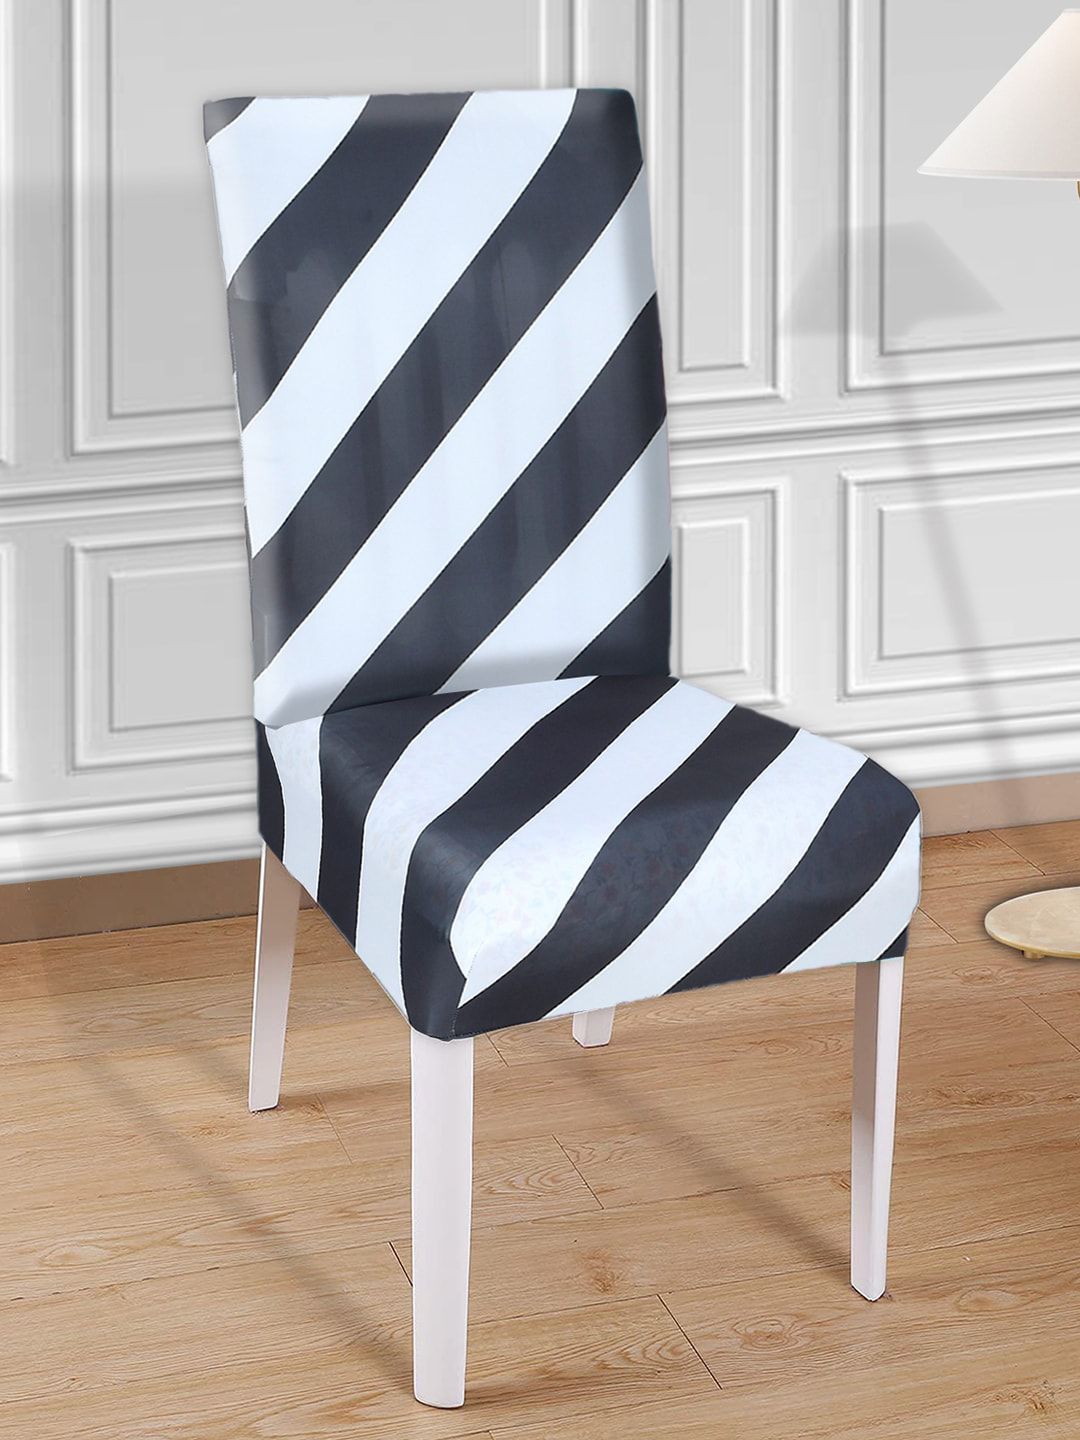 Kuber Industries Set Of 4 Black & White Solid Chair Covers Price in India